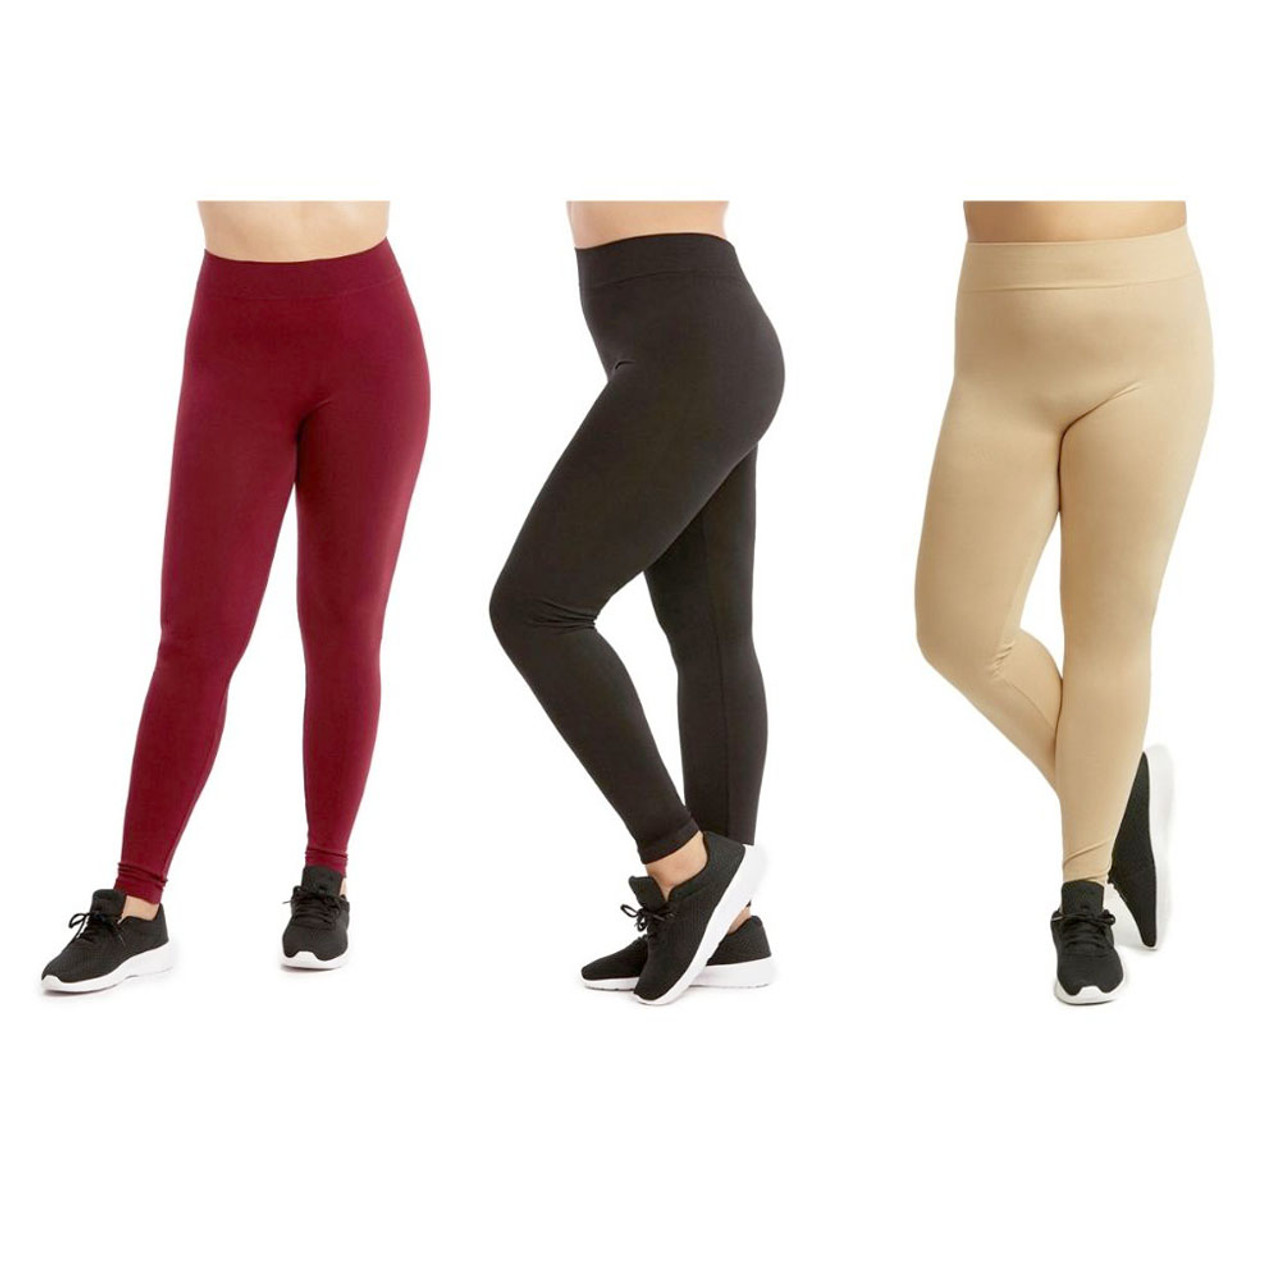 Plus Size Women's Casual Ultra-Soft Workout Leggings (3-Pack) 